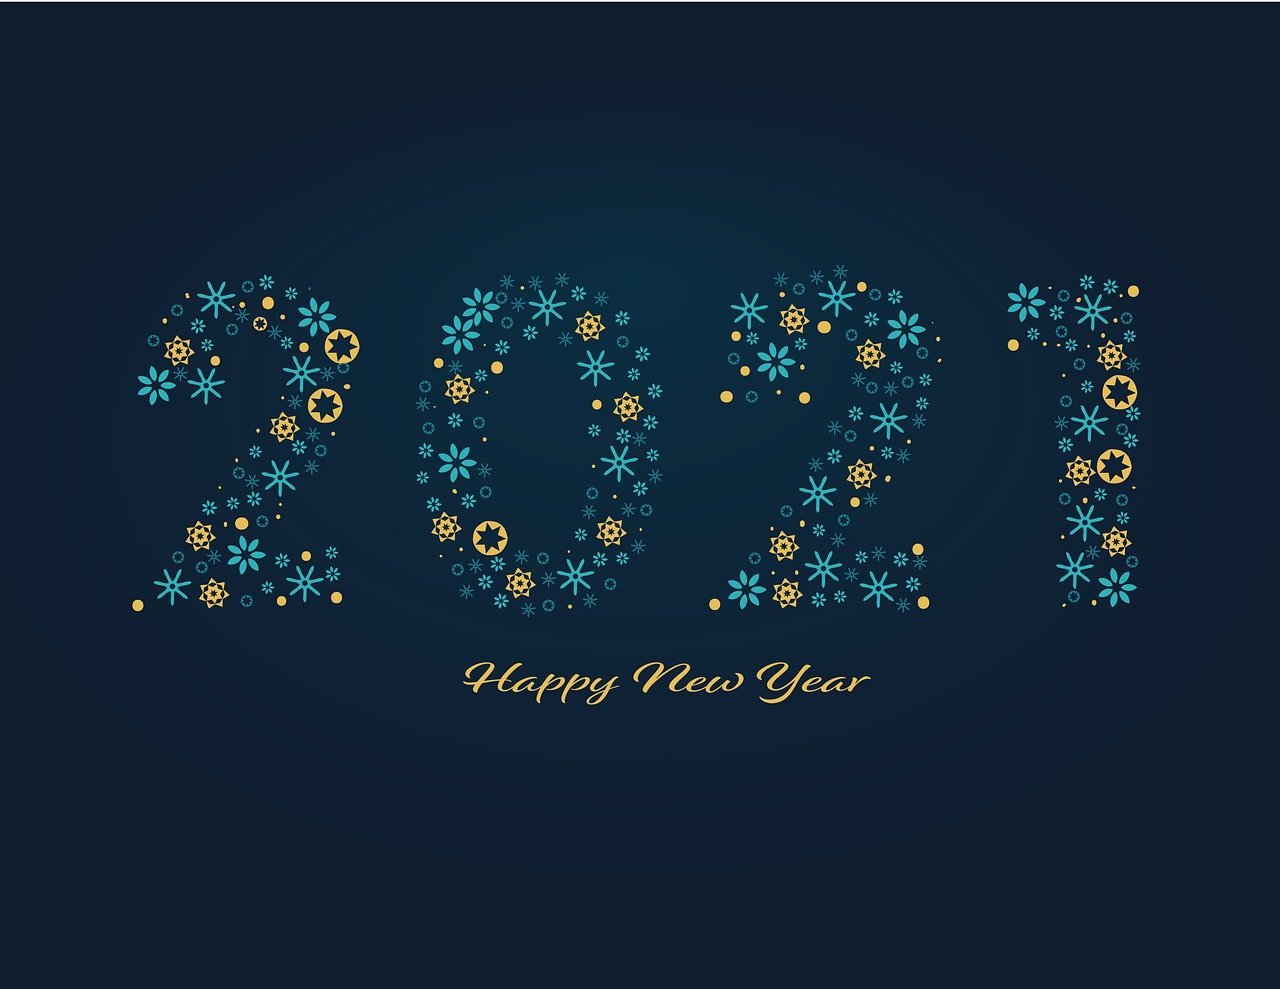 Happy New Year 2021 Facebook & What's app Status Wishes